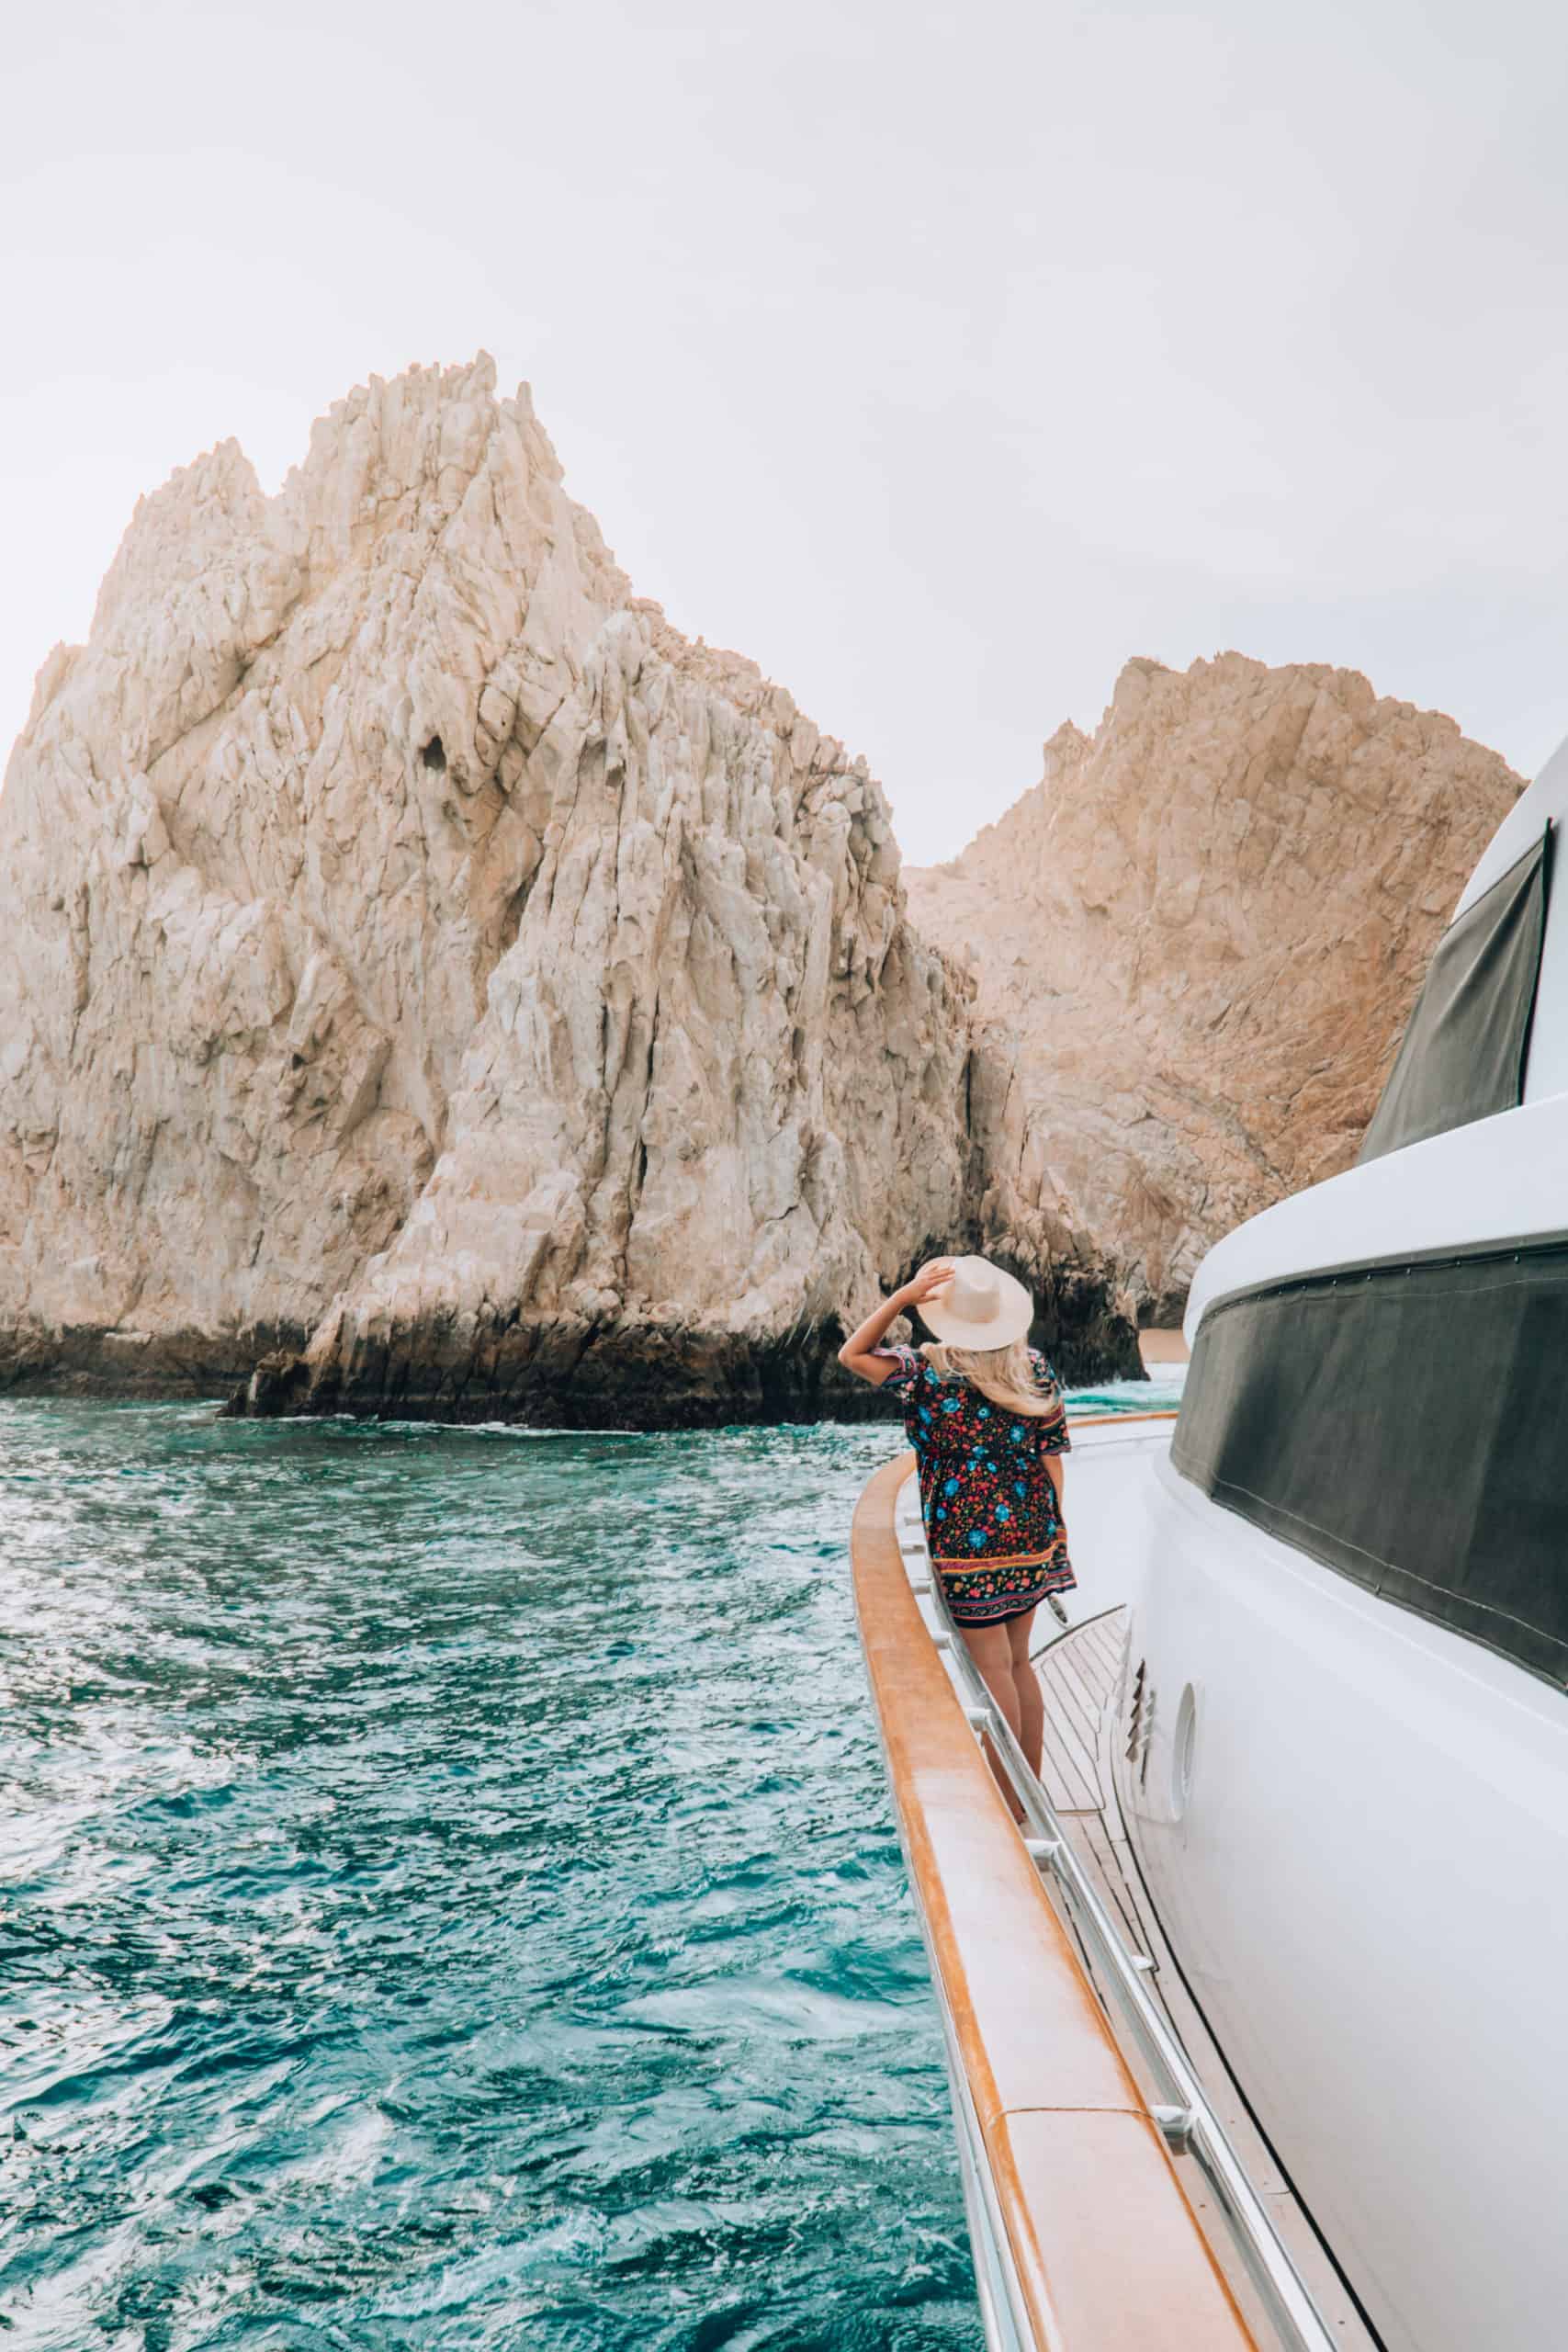 Boat day on Contessa yacht in Cabo San Lucas, Mexico